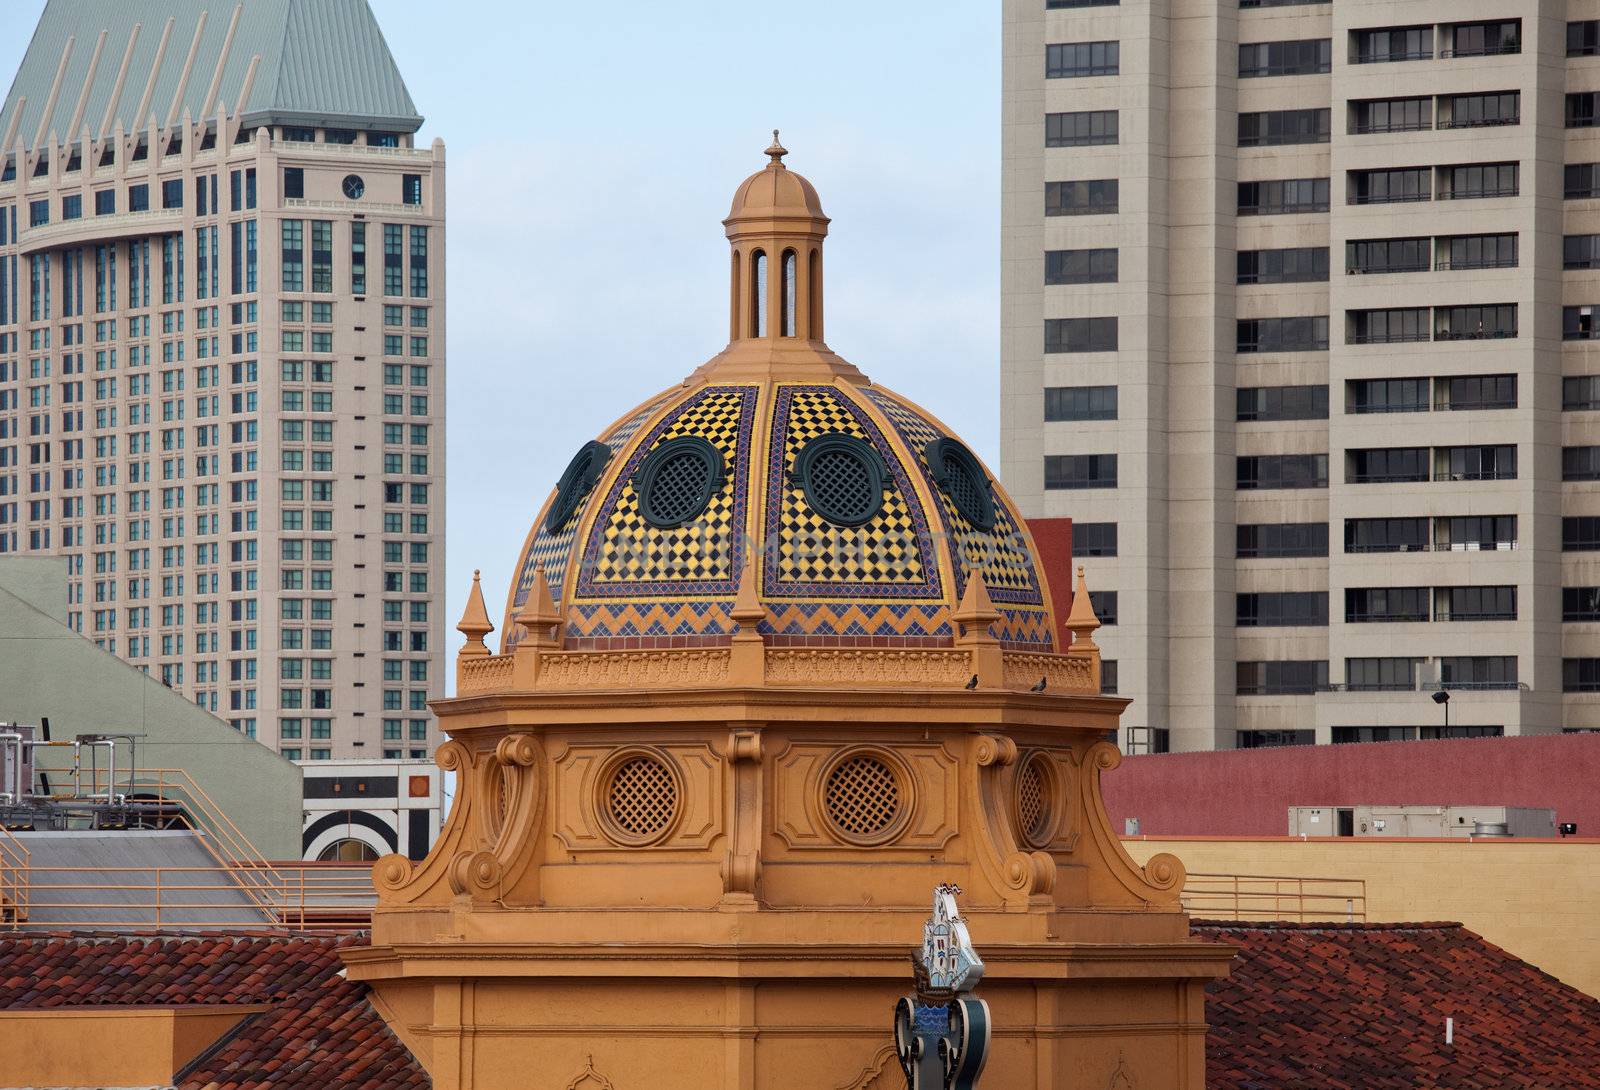 Ornate tower roof in San Diego by steheap